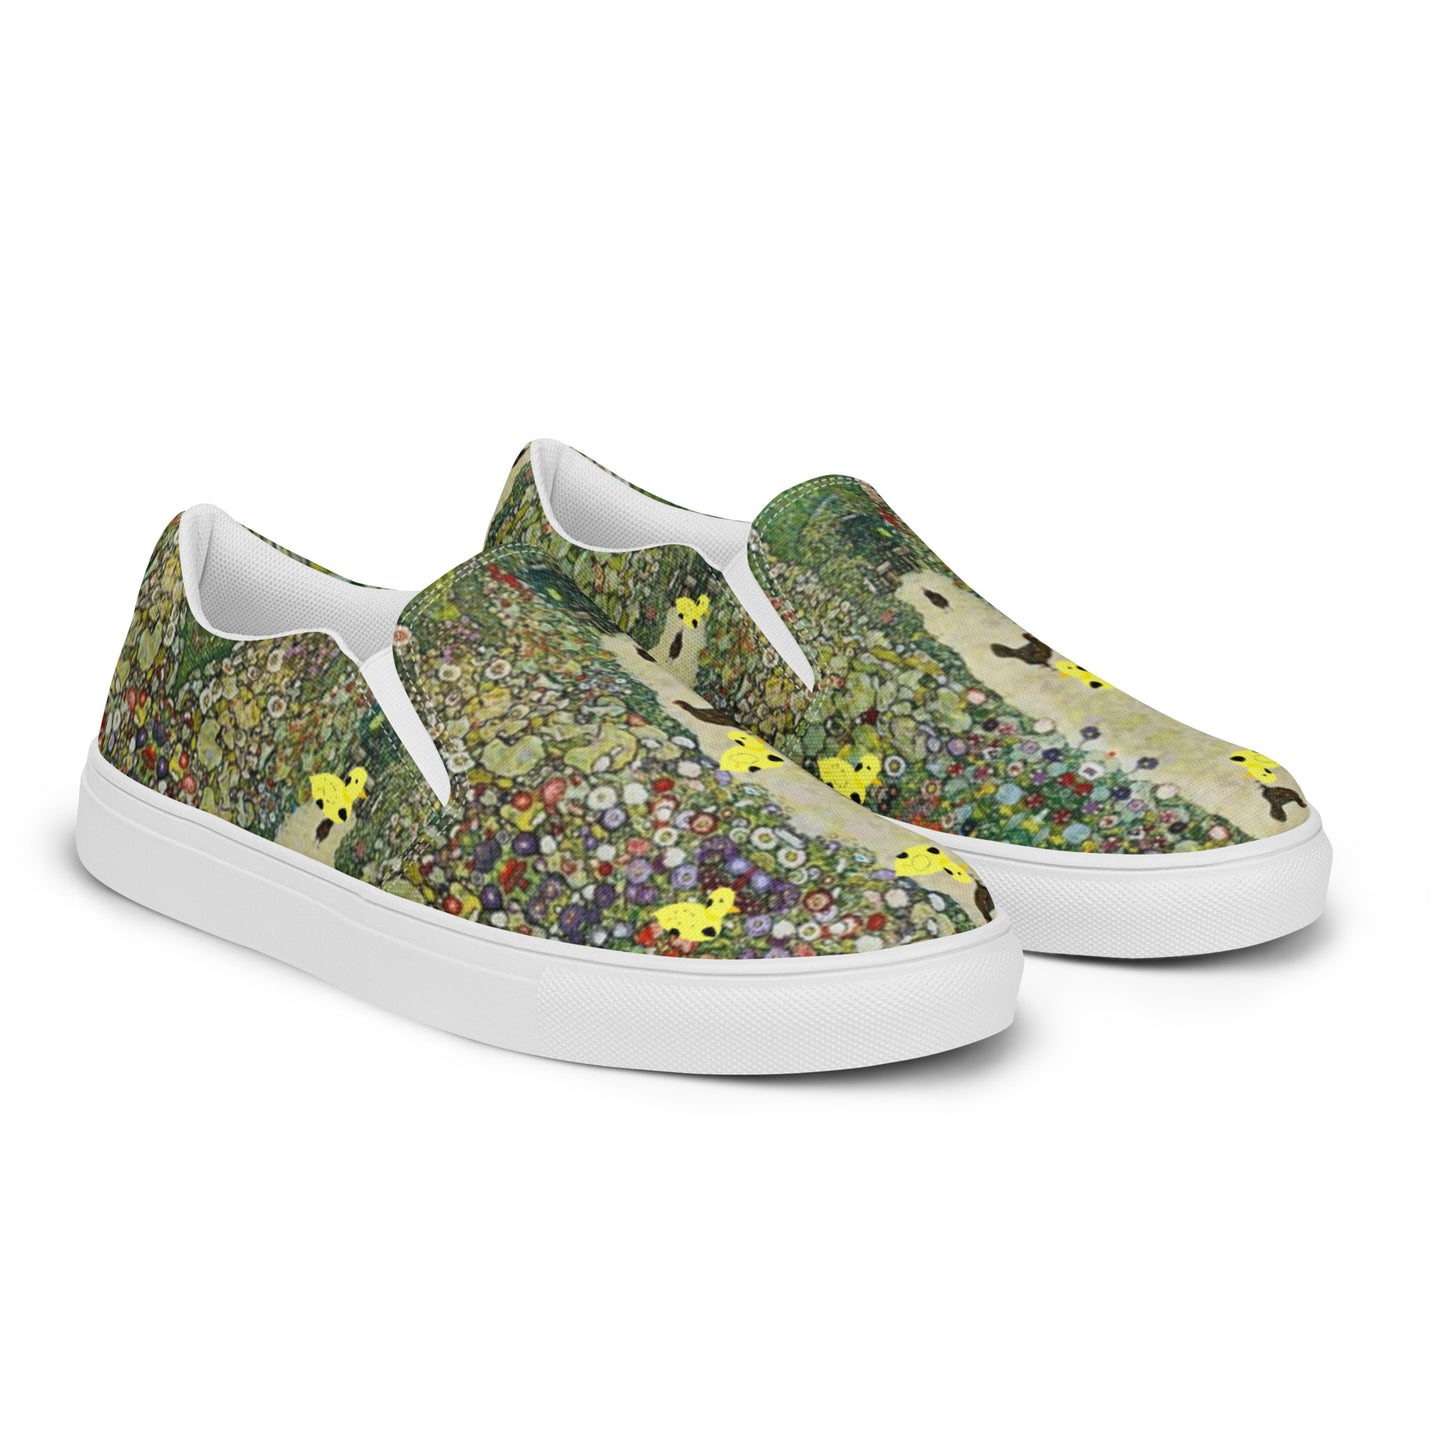 Slip-on canvas shoes with Myrtle and Gustav's Chickens by D.B. print (Women's sizing)